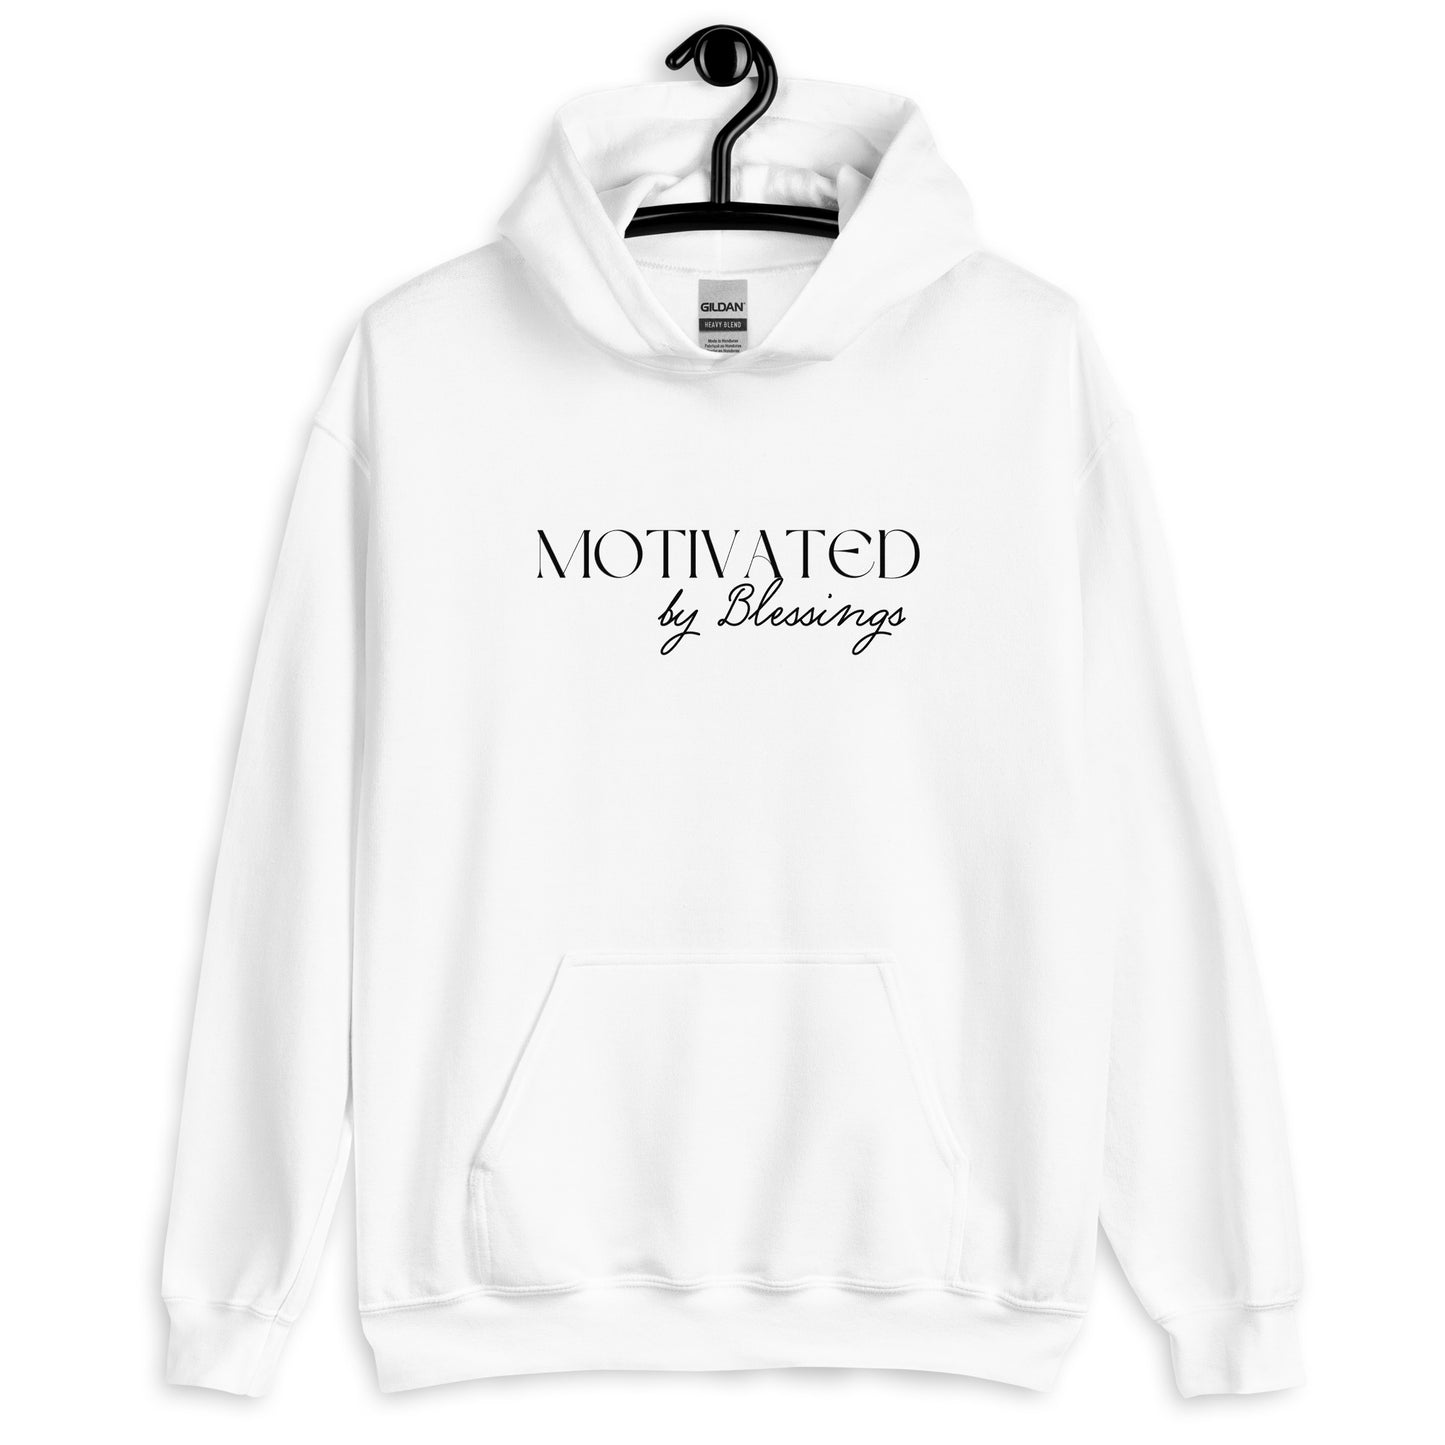 Motivated by Blessings - Hoodie